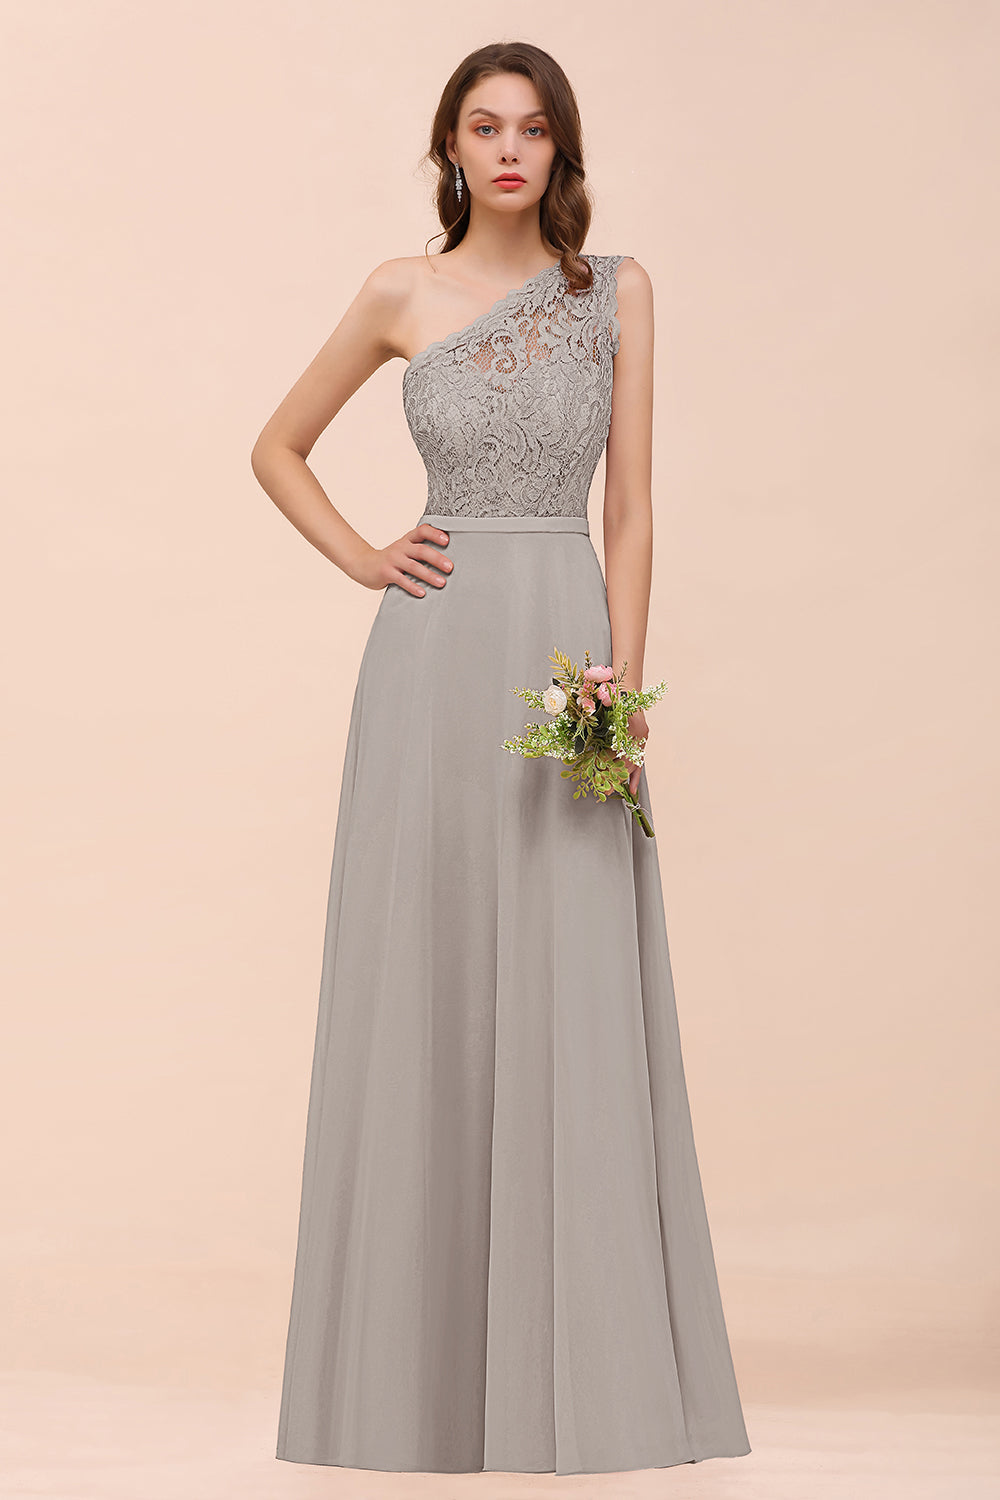 New Arrival Dusty Rose One Shoulder Lace Long Bridesmaid Dress-27dress